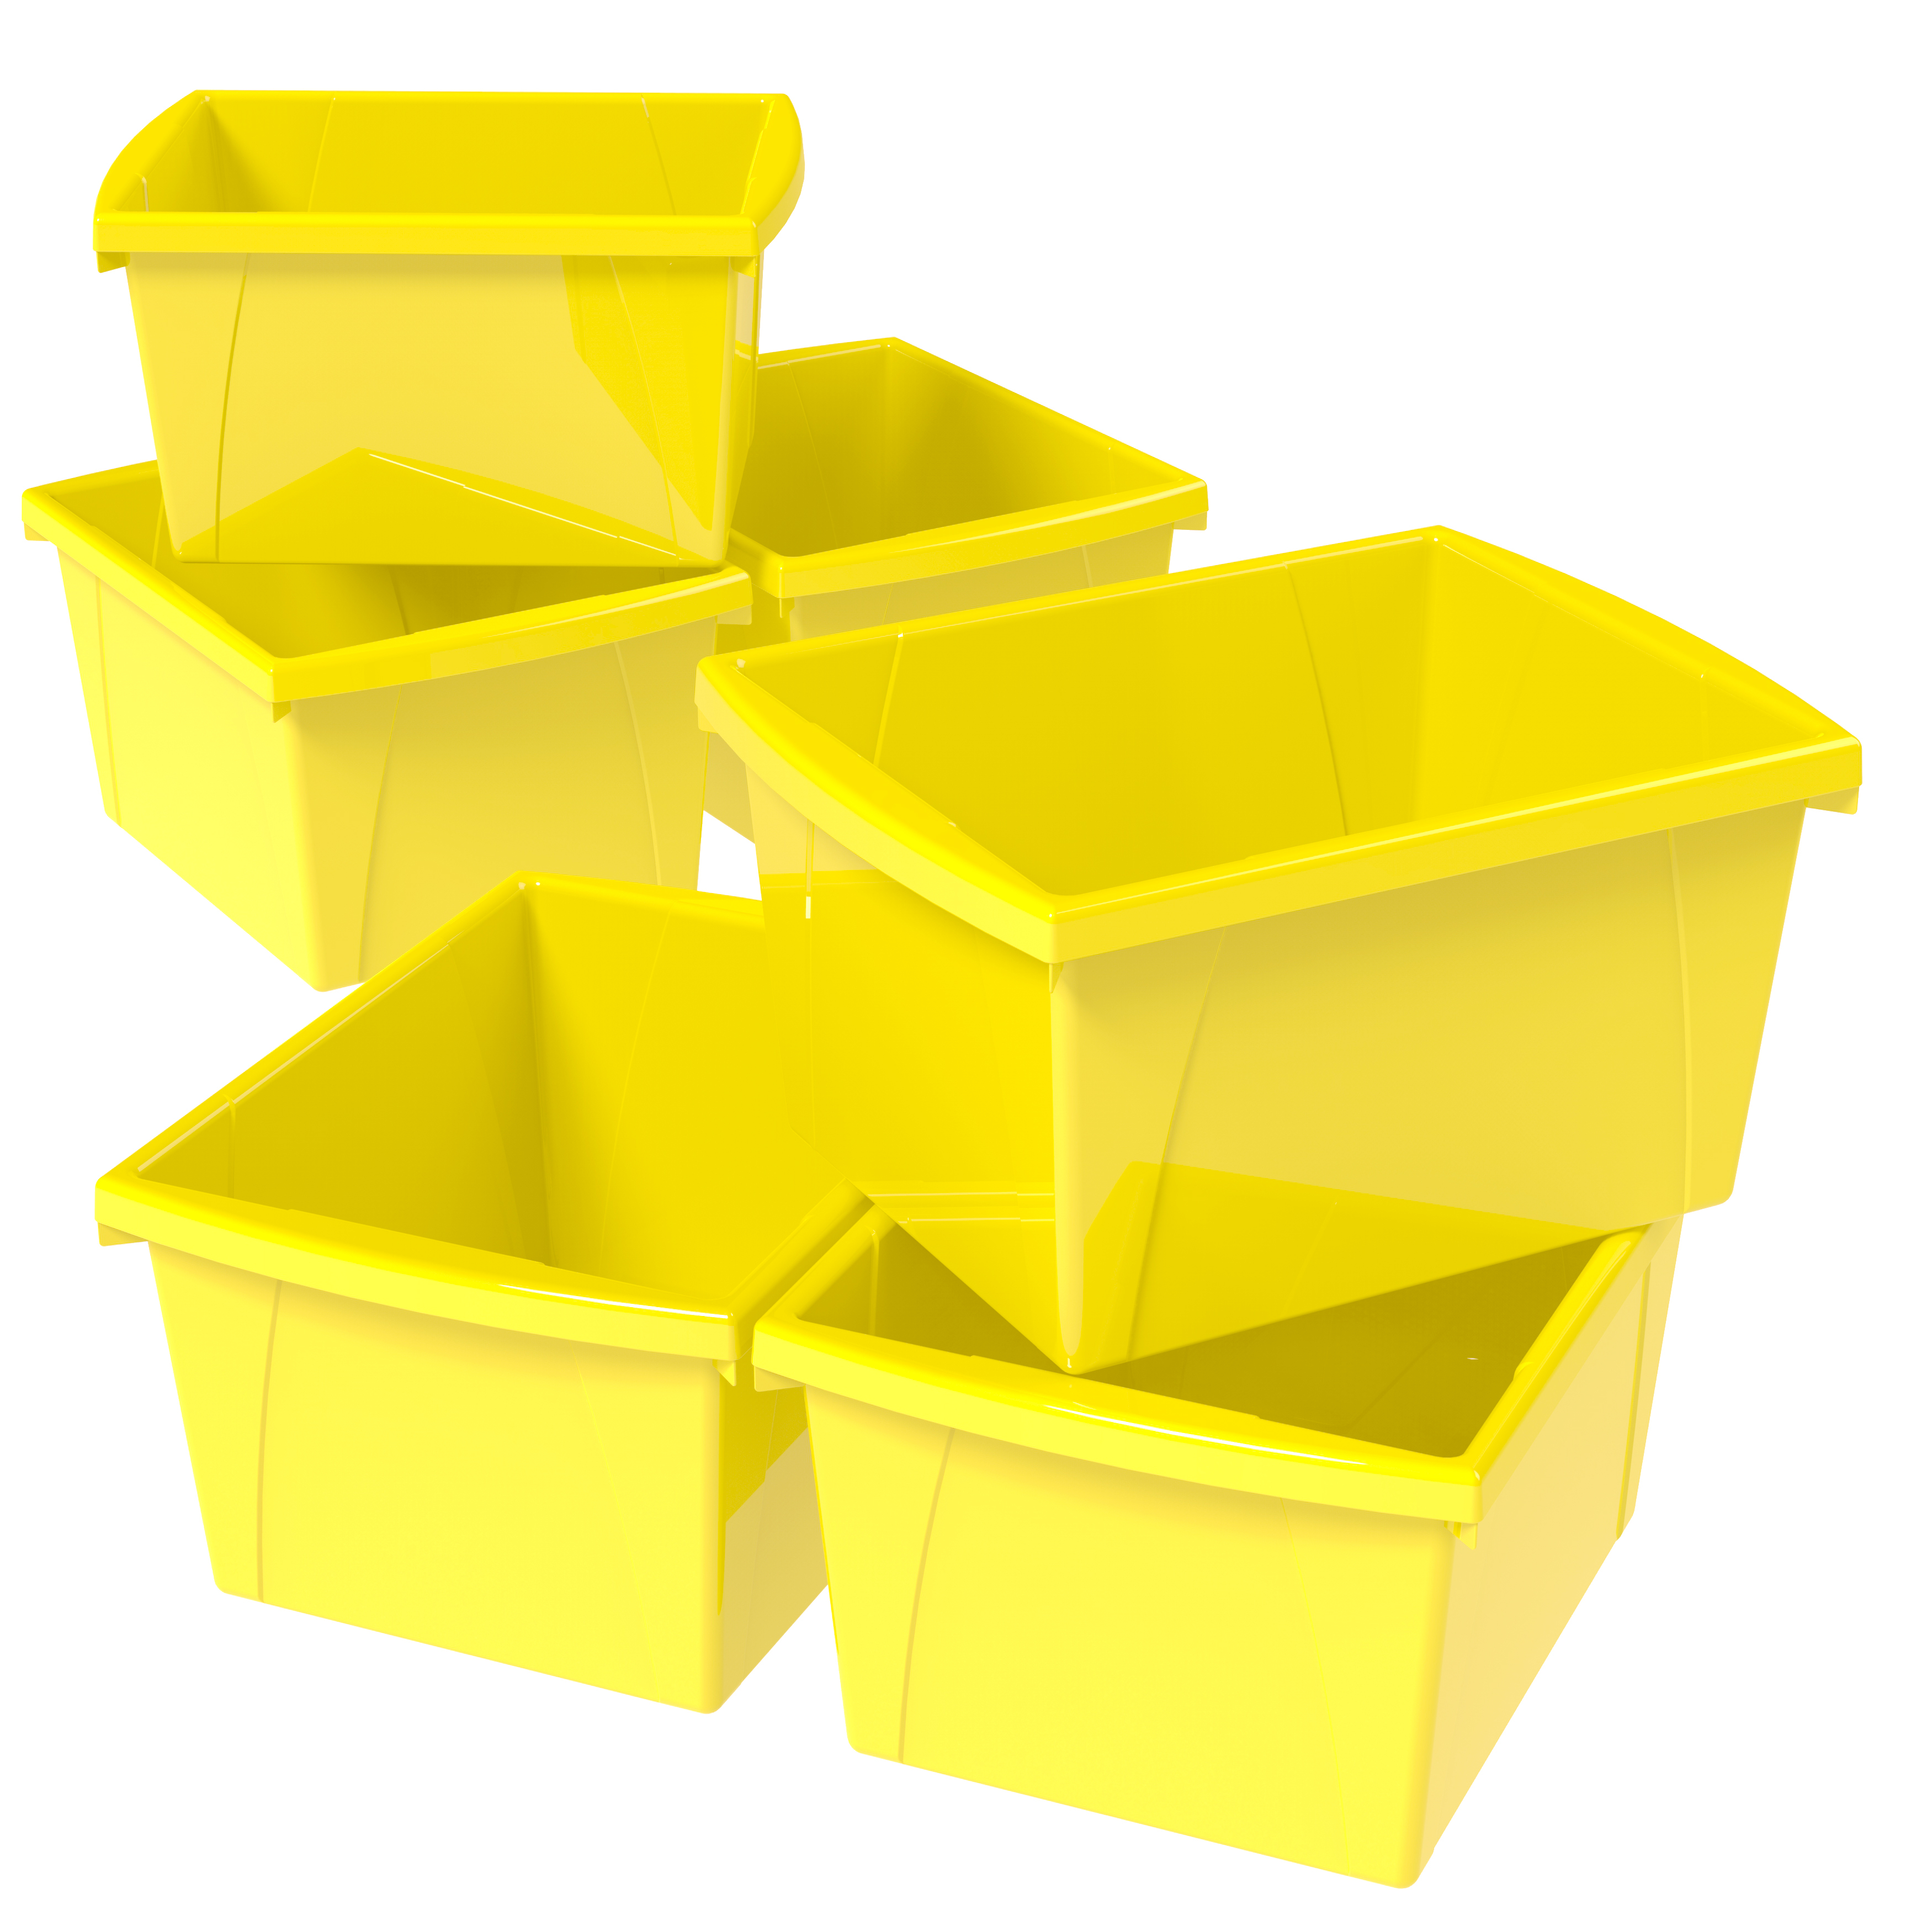 Storex 4 Gallon15 L Classroom Storage Binyellow 6 Unitspack intended for proportions 3500 X 3500